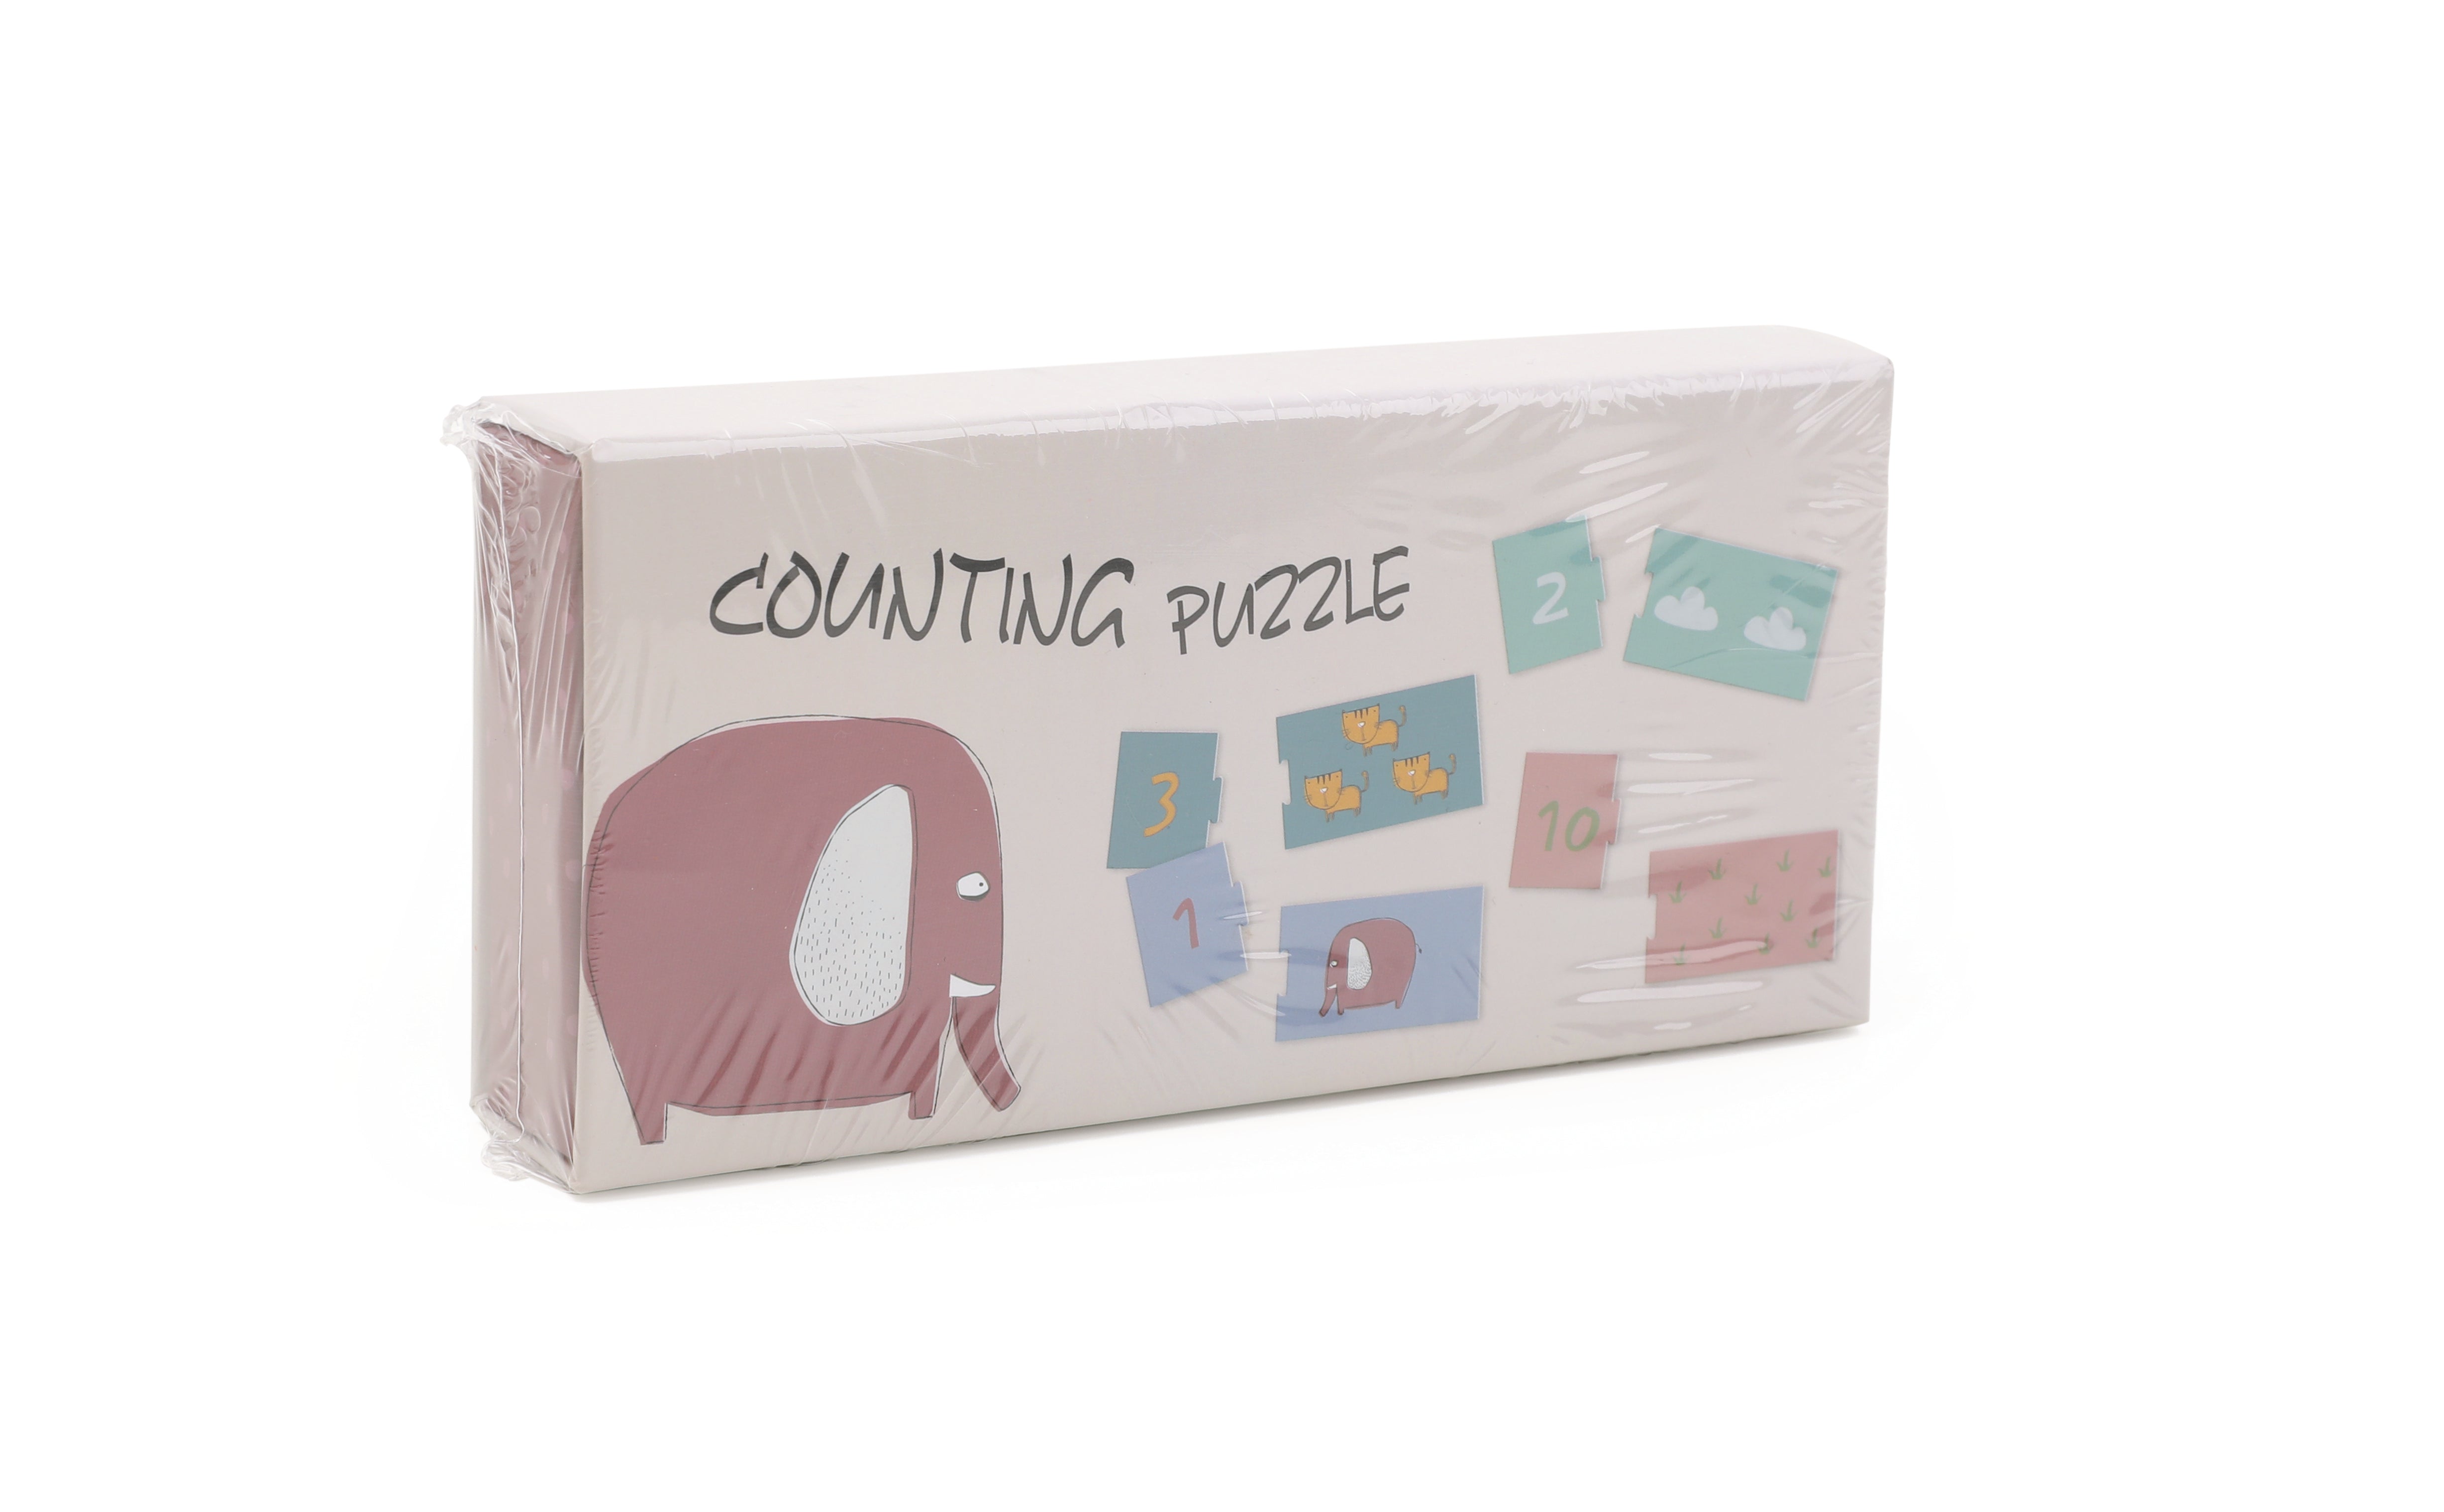 Counting Puzzle 1-10.